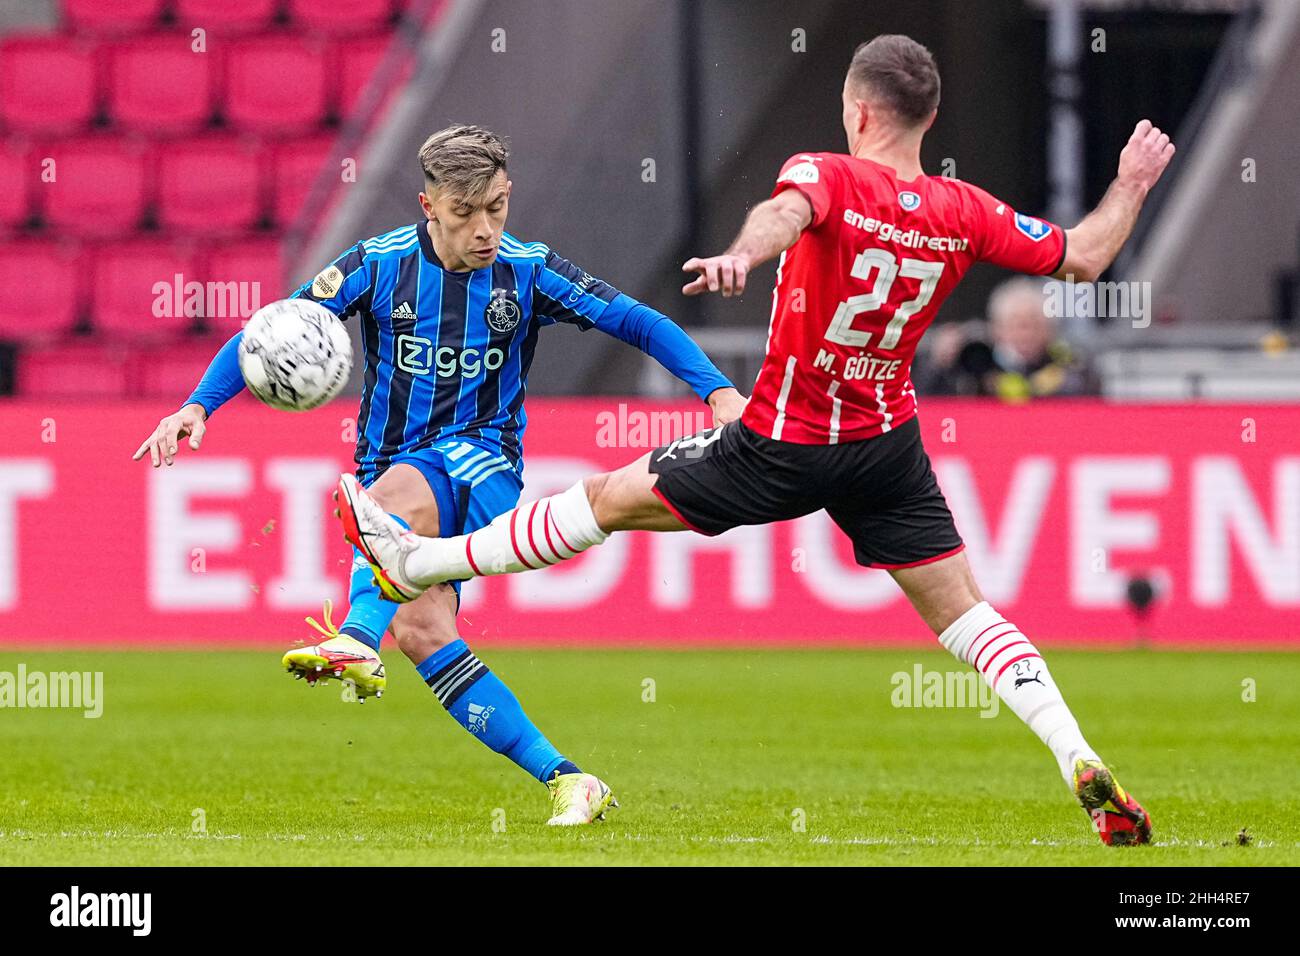 EINDHOVEN, NETHERLANDS - JANUARY 23: Mario Gotze of PSV Eindhoven, Lisandro Martinez of Ajax during the Dutch Eredivisie match between PSV Eindhoven and Ajax at Philips Stadion on January 23, 2022 in Eindhoven, Netherlands (Photo by Geert van Erven/Orange Pictures) Credit: Orange Pics BV/Alamy Live News Credit: Orange Pics BV/Alamy Live News Stock Photo